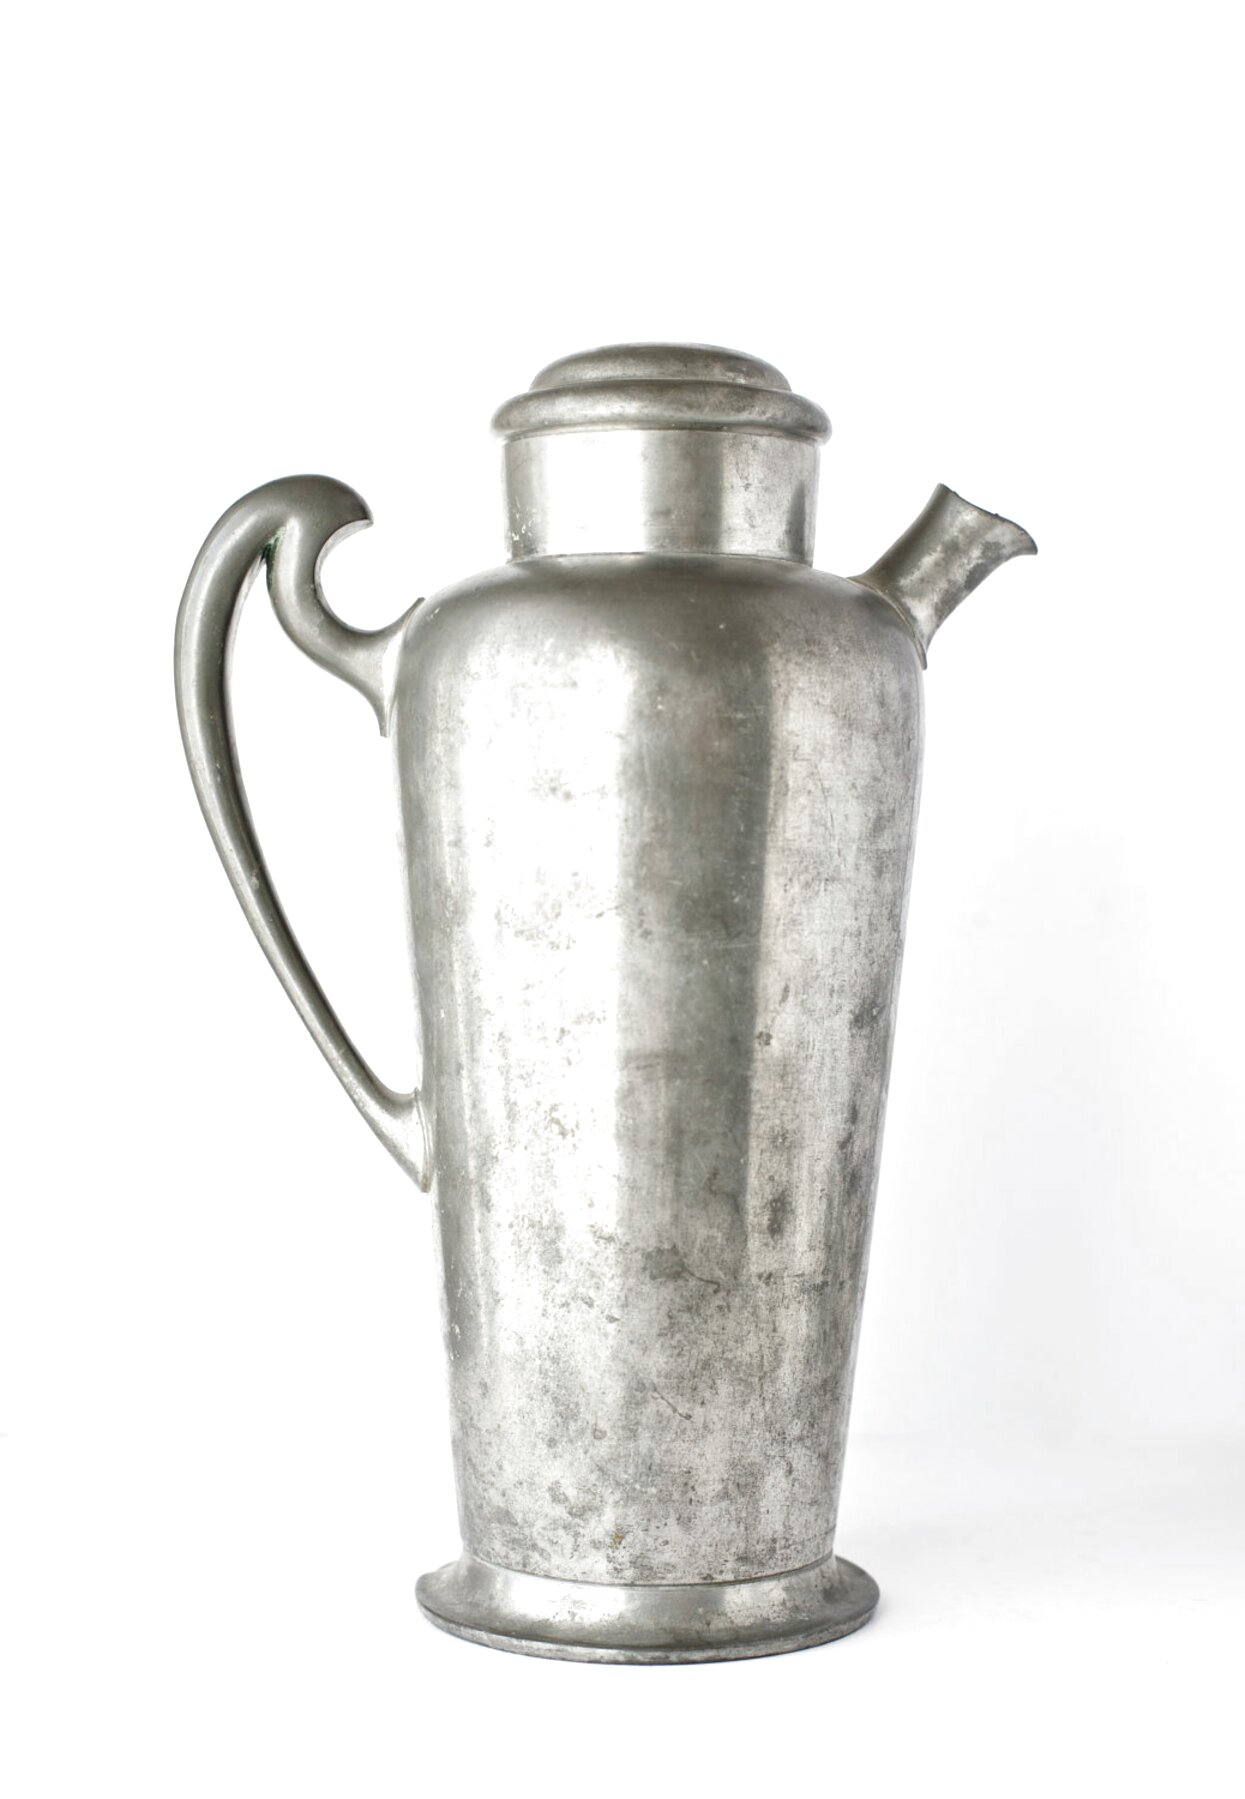 Antique Silver Cocktail Shakers for sale in UK | 73 used Antique Silver ...